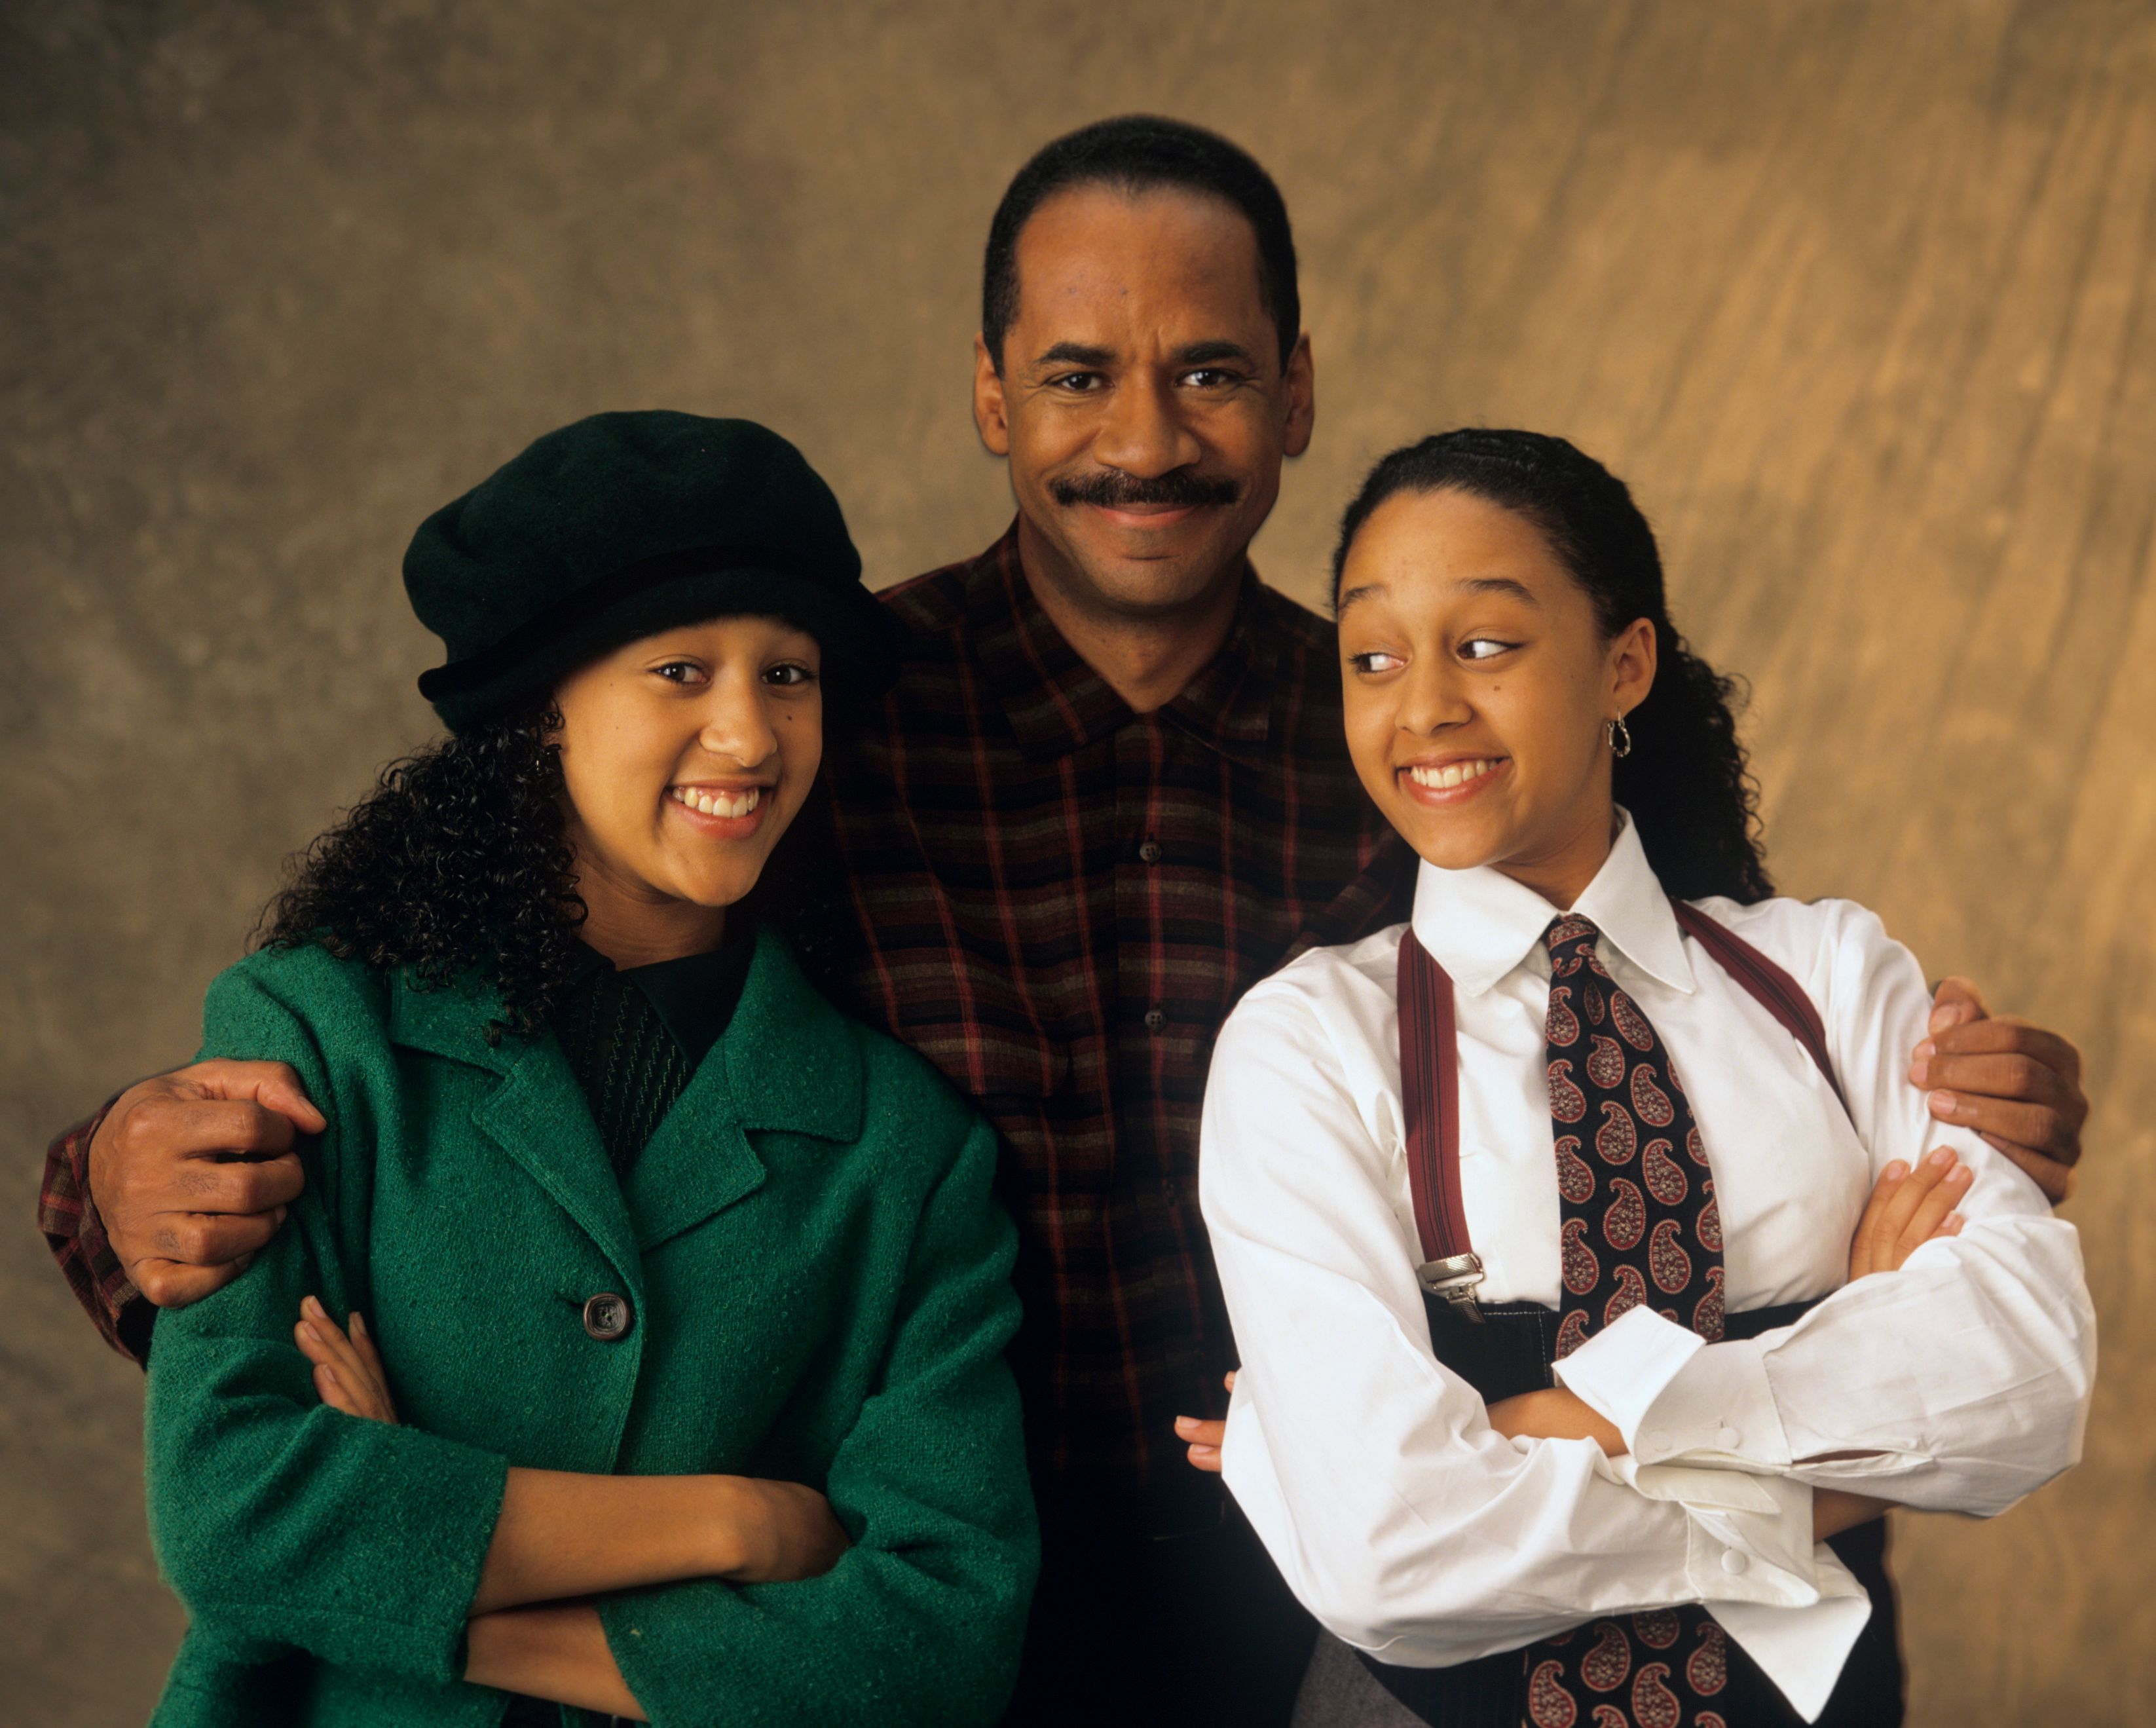 A picture of Tim Reid, Tia and Tamera Mowry from "Sister, Sister" | Photo: Getty Images